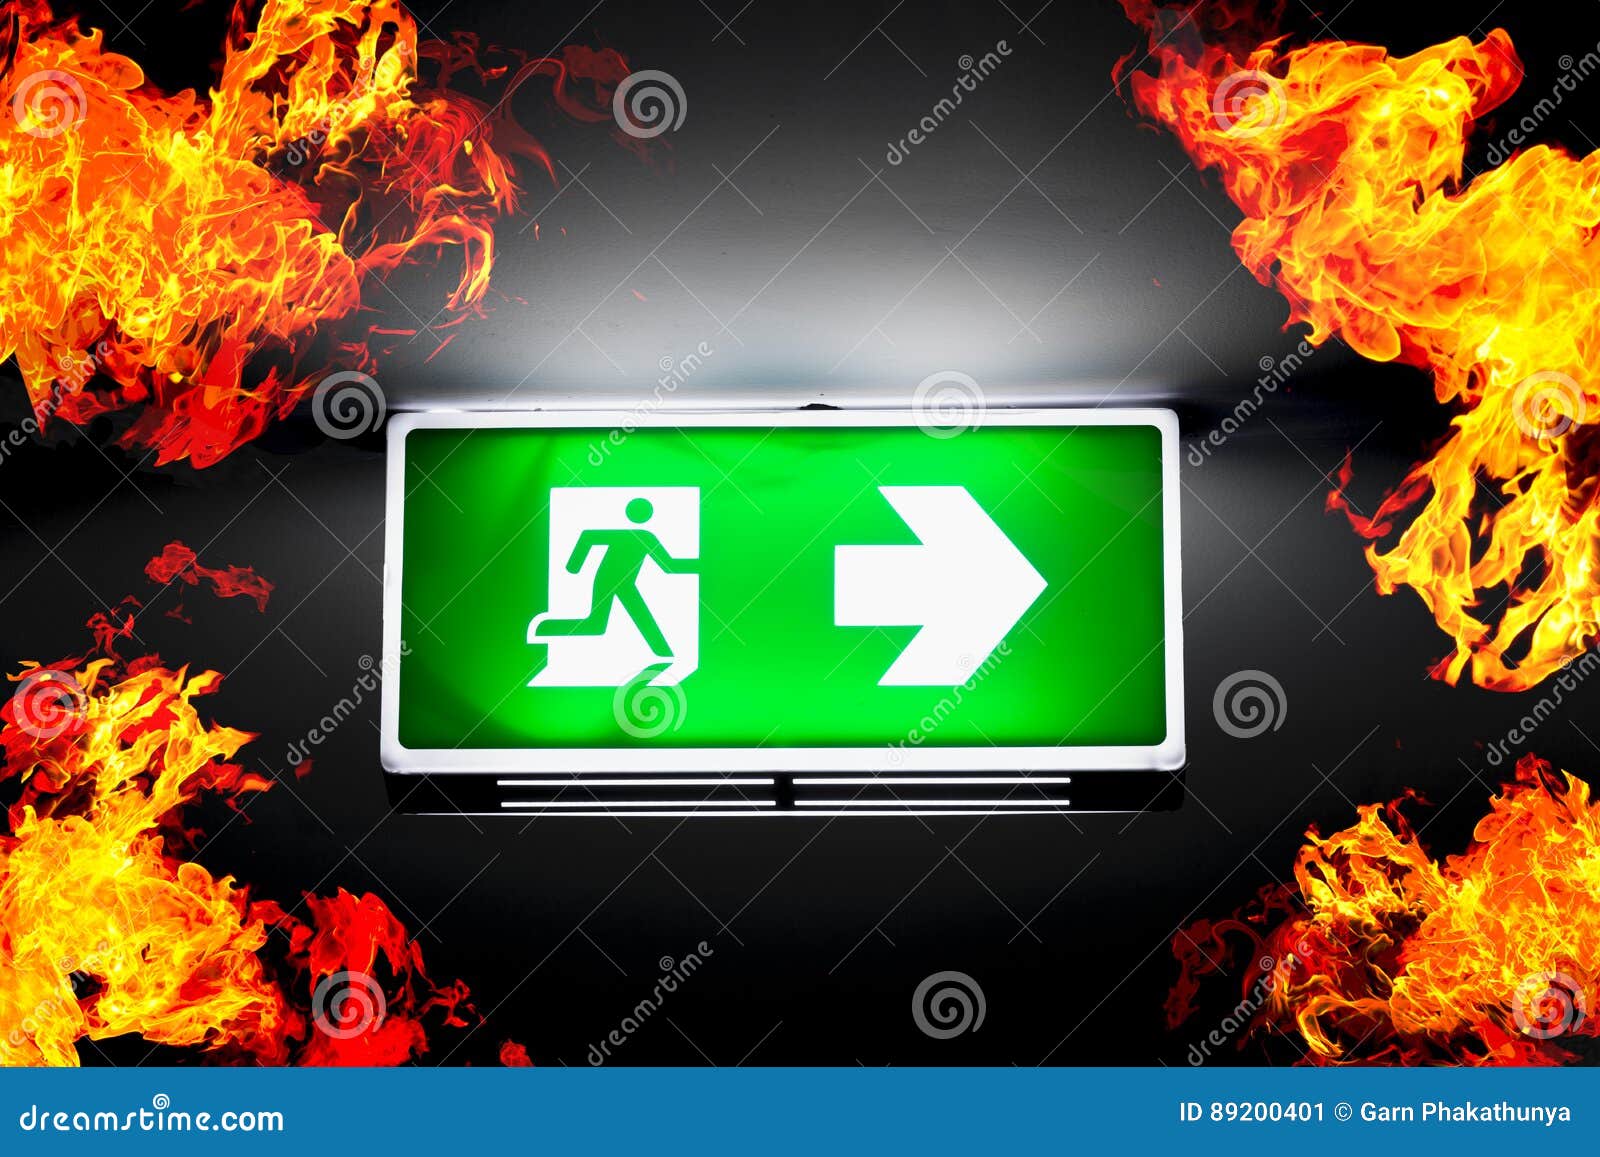 fire exits in car park area and frame of fire burn.